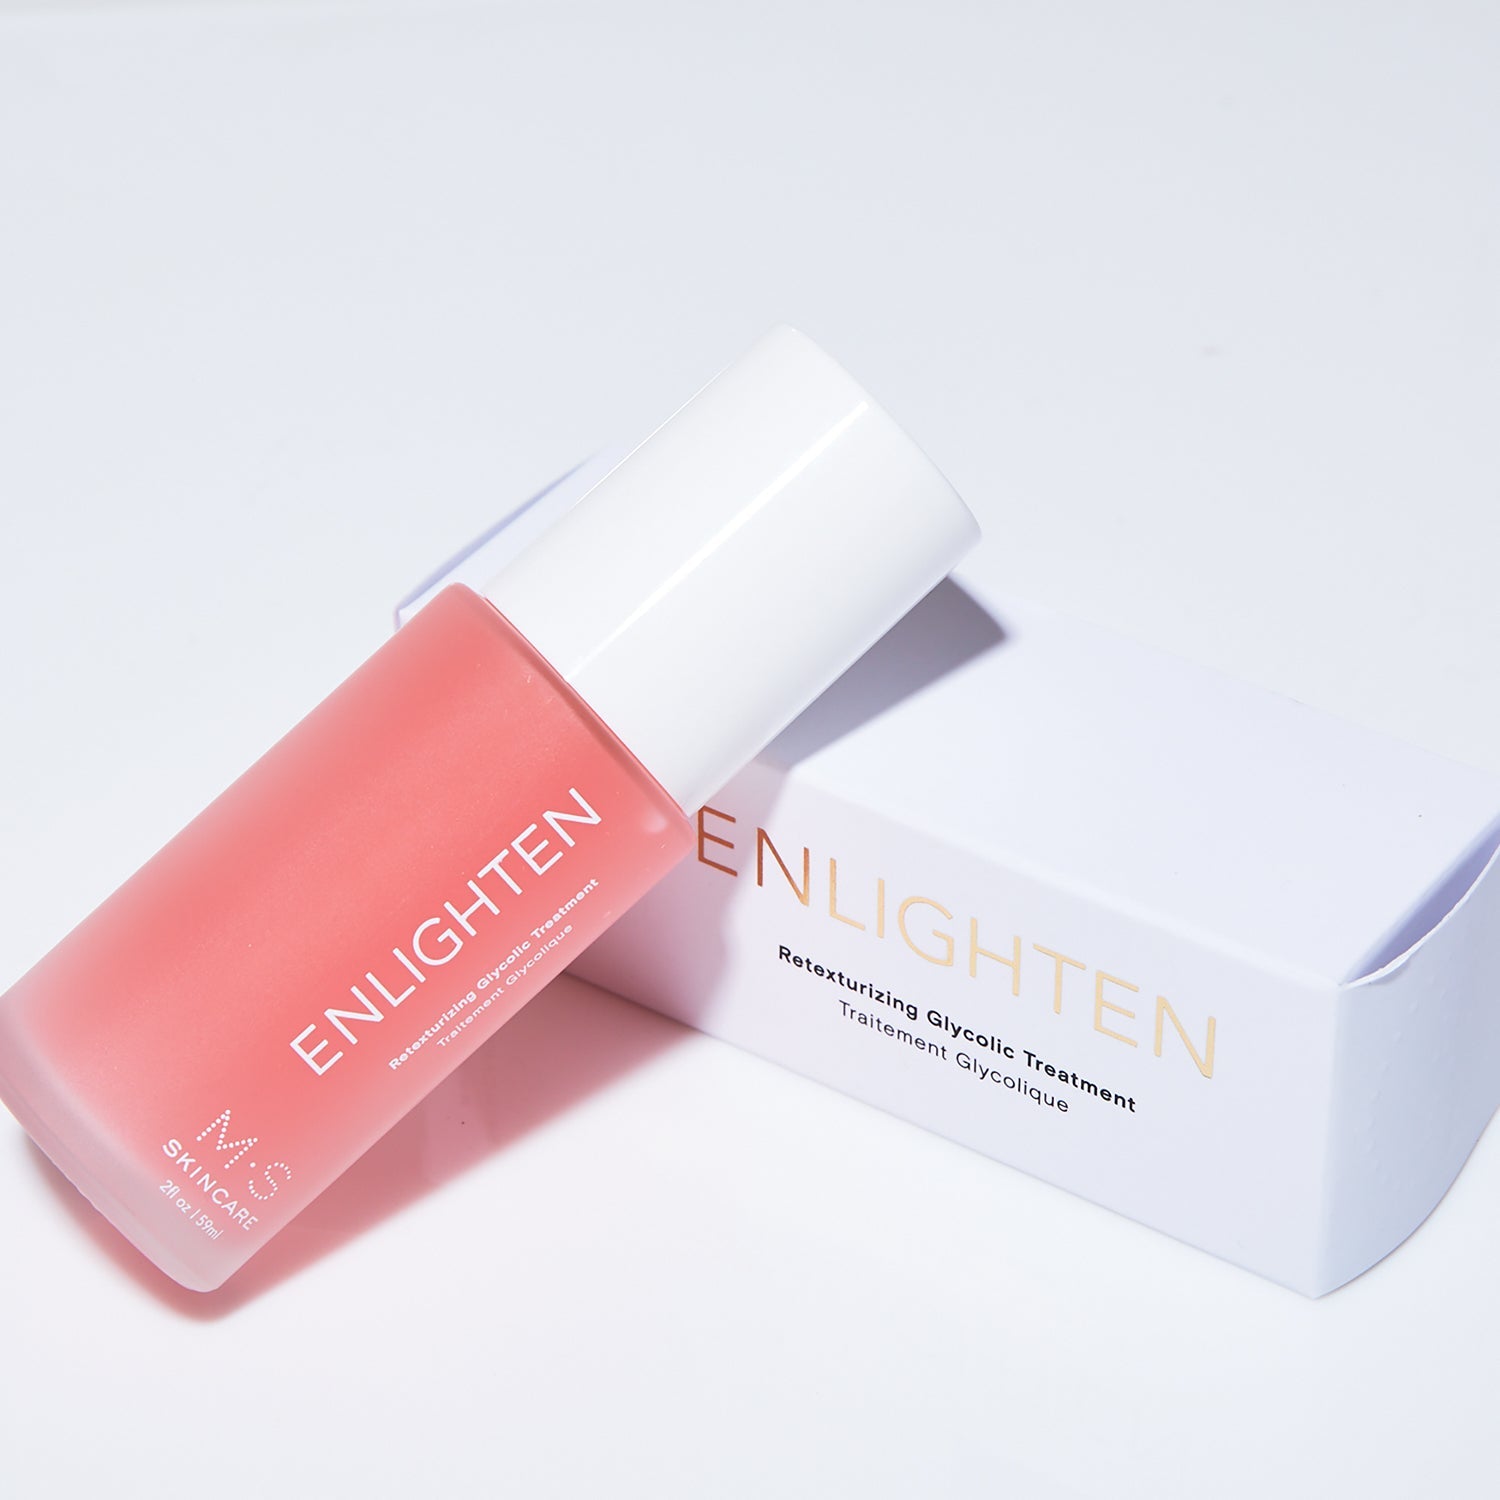  ENLIGHTEN | Retexturizing Glycolic Treatment Mullein and Sparrow Perfumarie